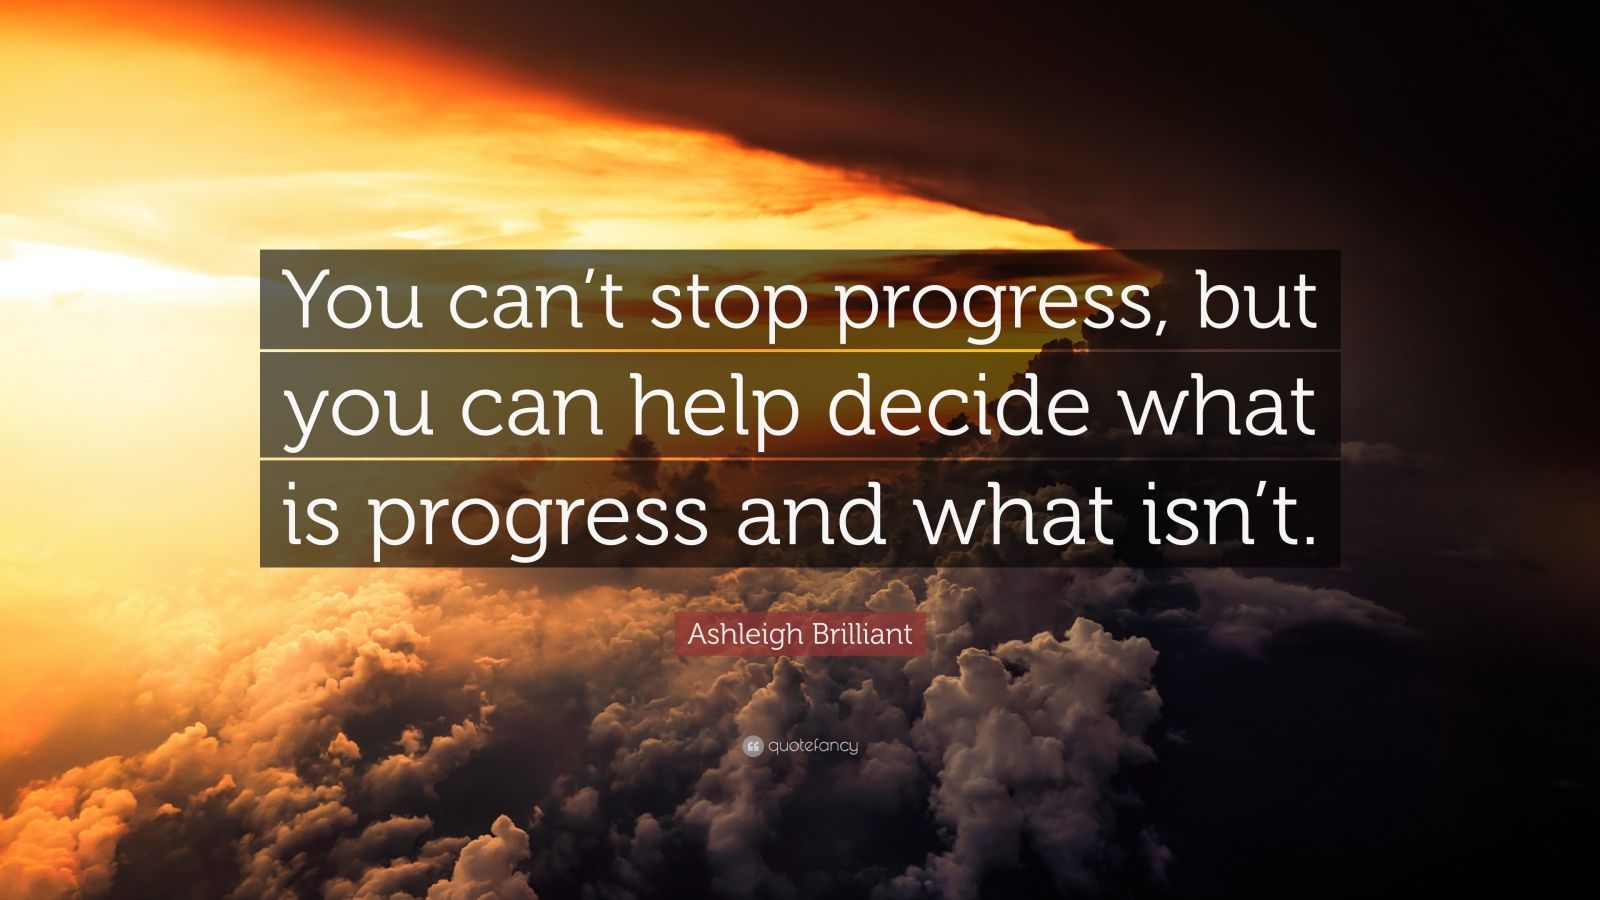 Ashleigh Brilliant Quote: “You can’t stop progress, but you can help ...